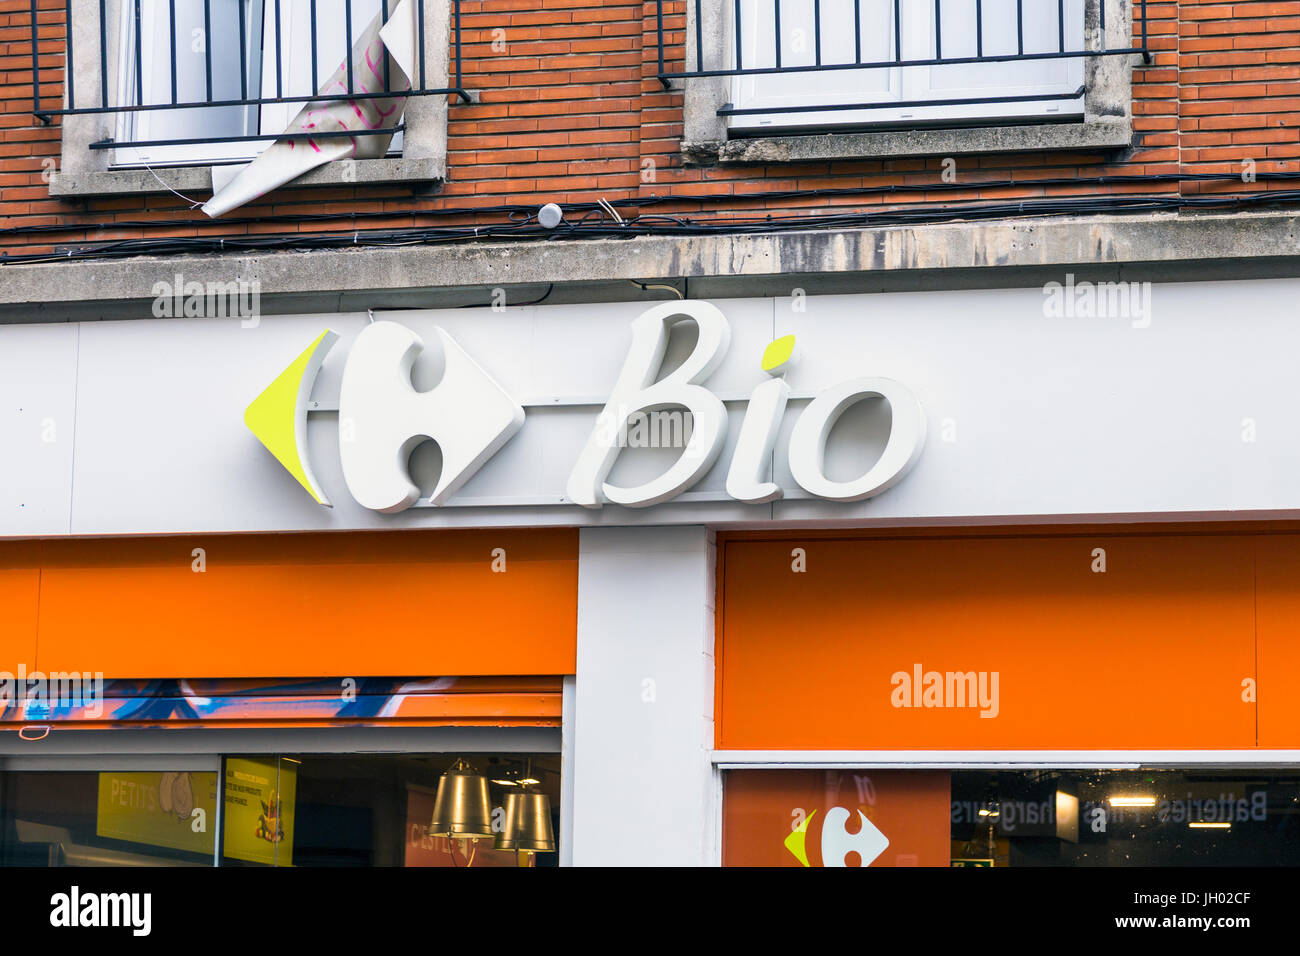 Carrefour Bio grocery shop front in Lille, France Stock Photo